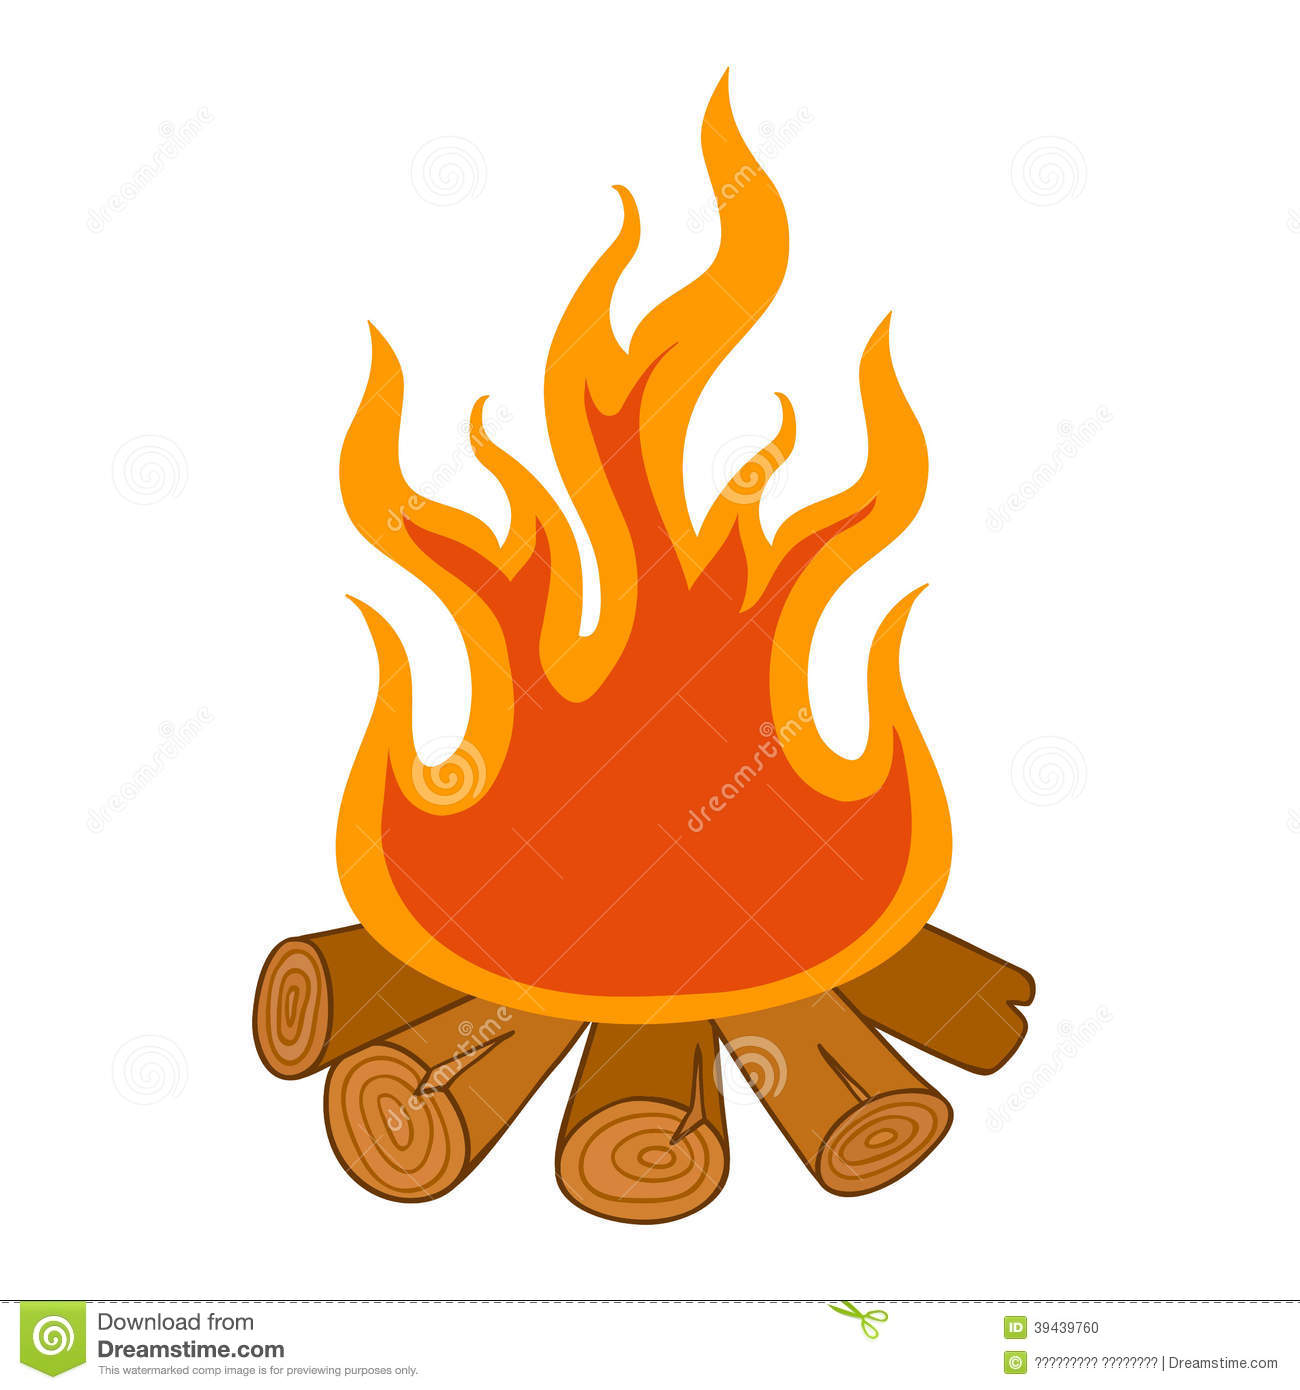 Fire Pit Clipart Suggest, Fire Pit Clipart Free